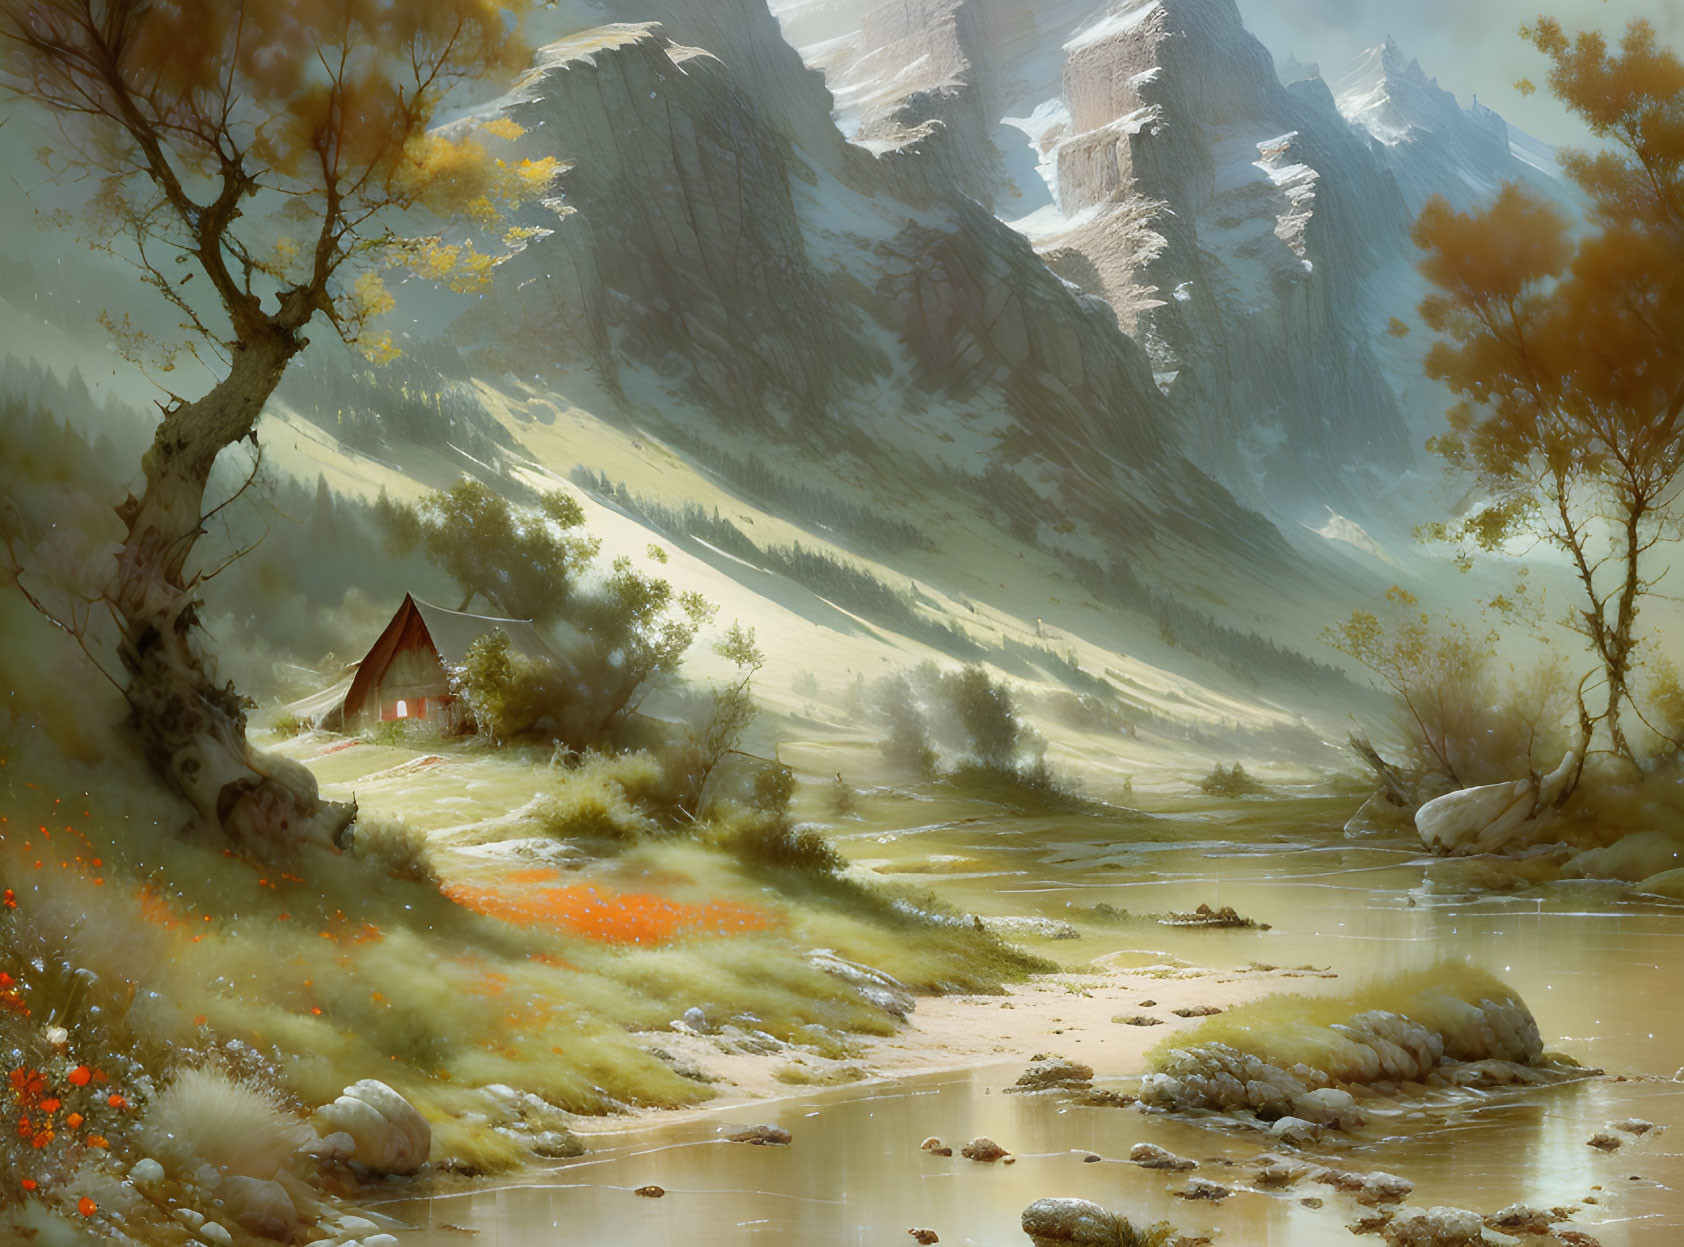 Tranquil autumn landscape with cottage, stream, and misty mountains